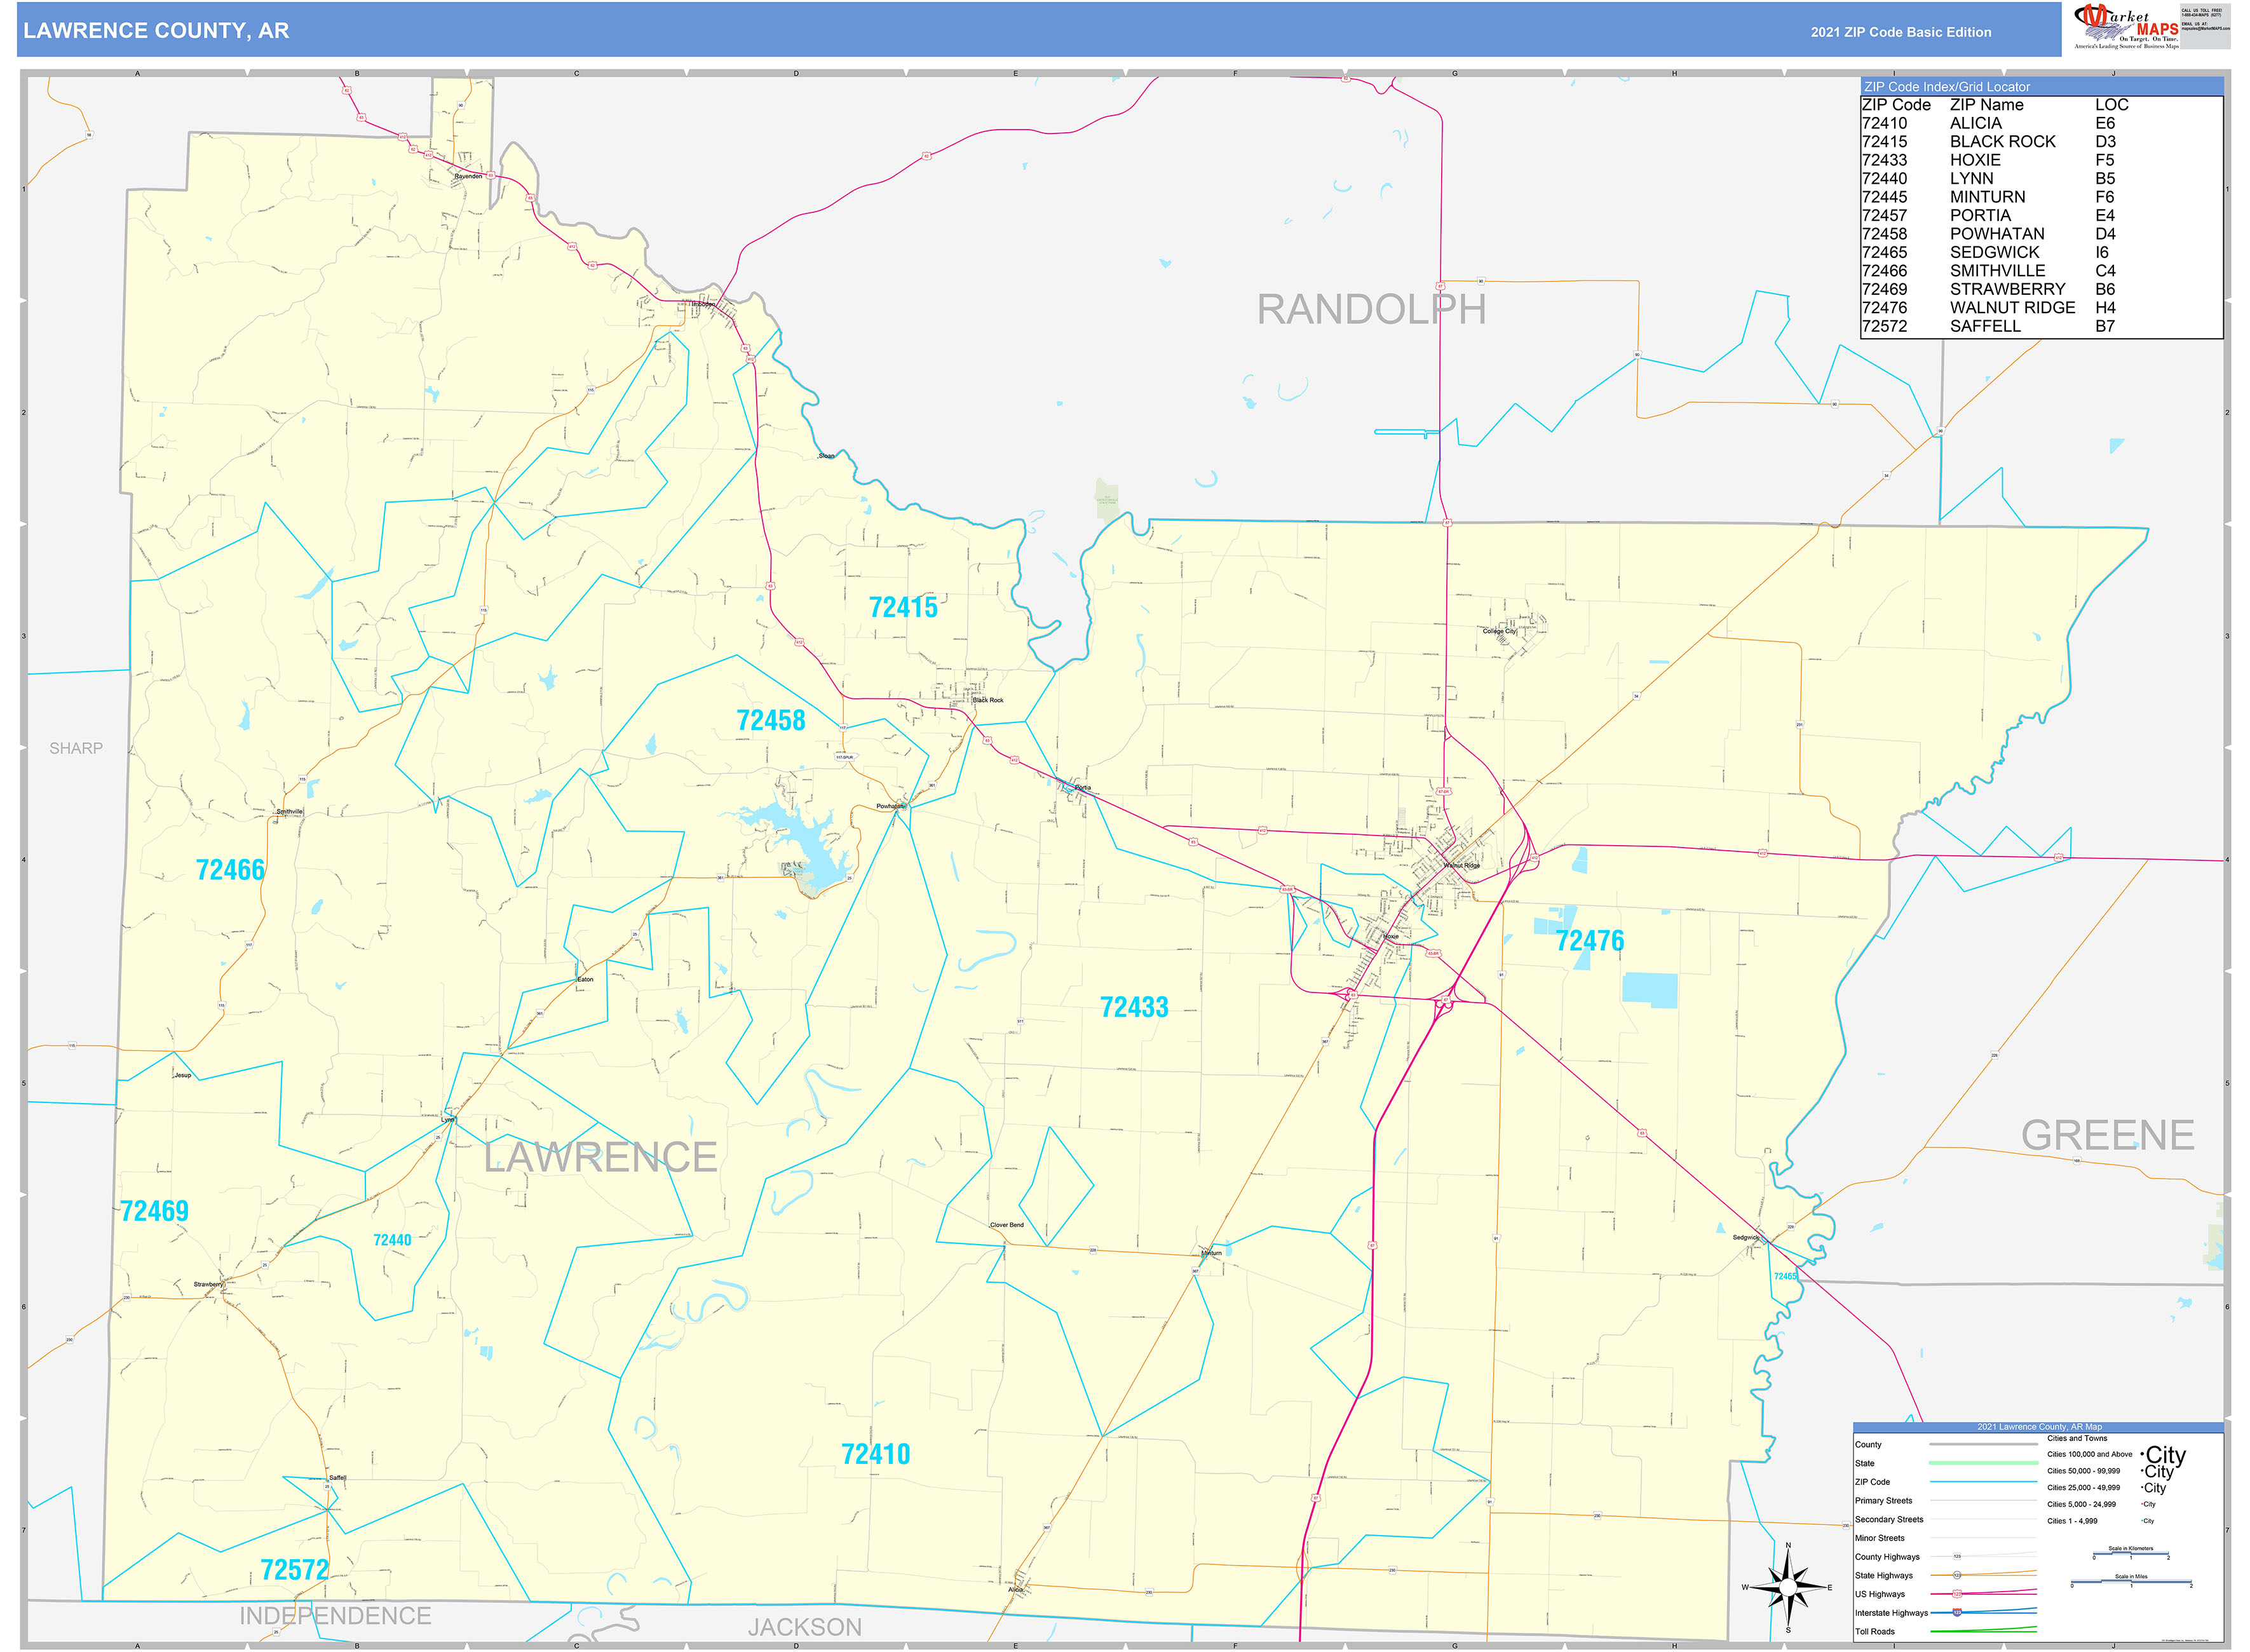 Lawrence County AR Zip Code Wall Map Basic Style by MarketMAPS